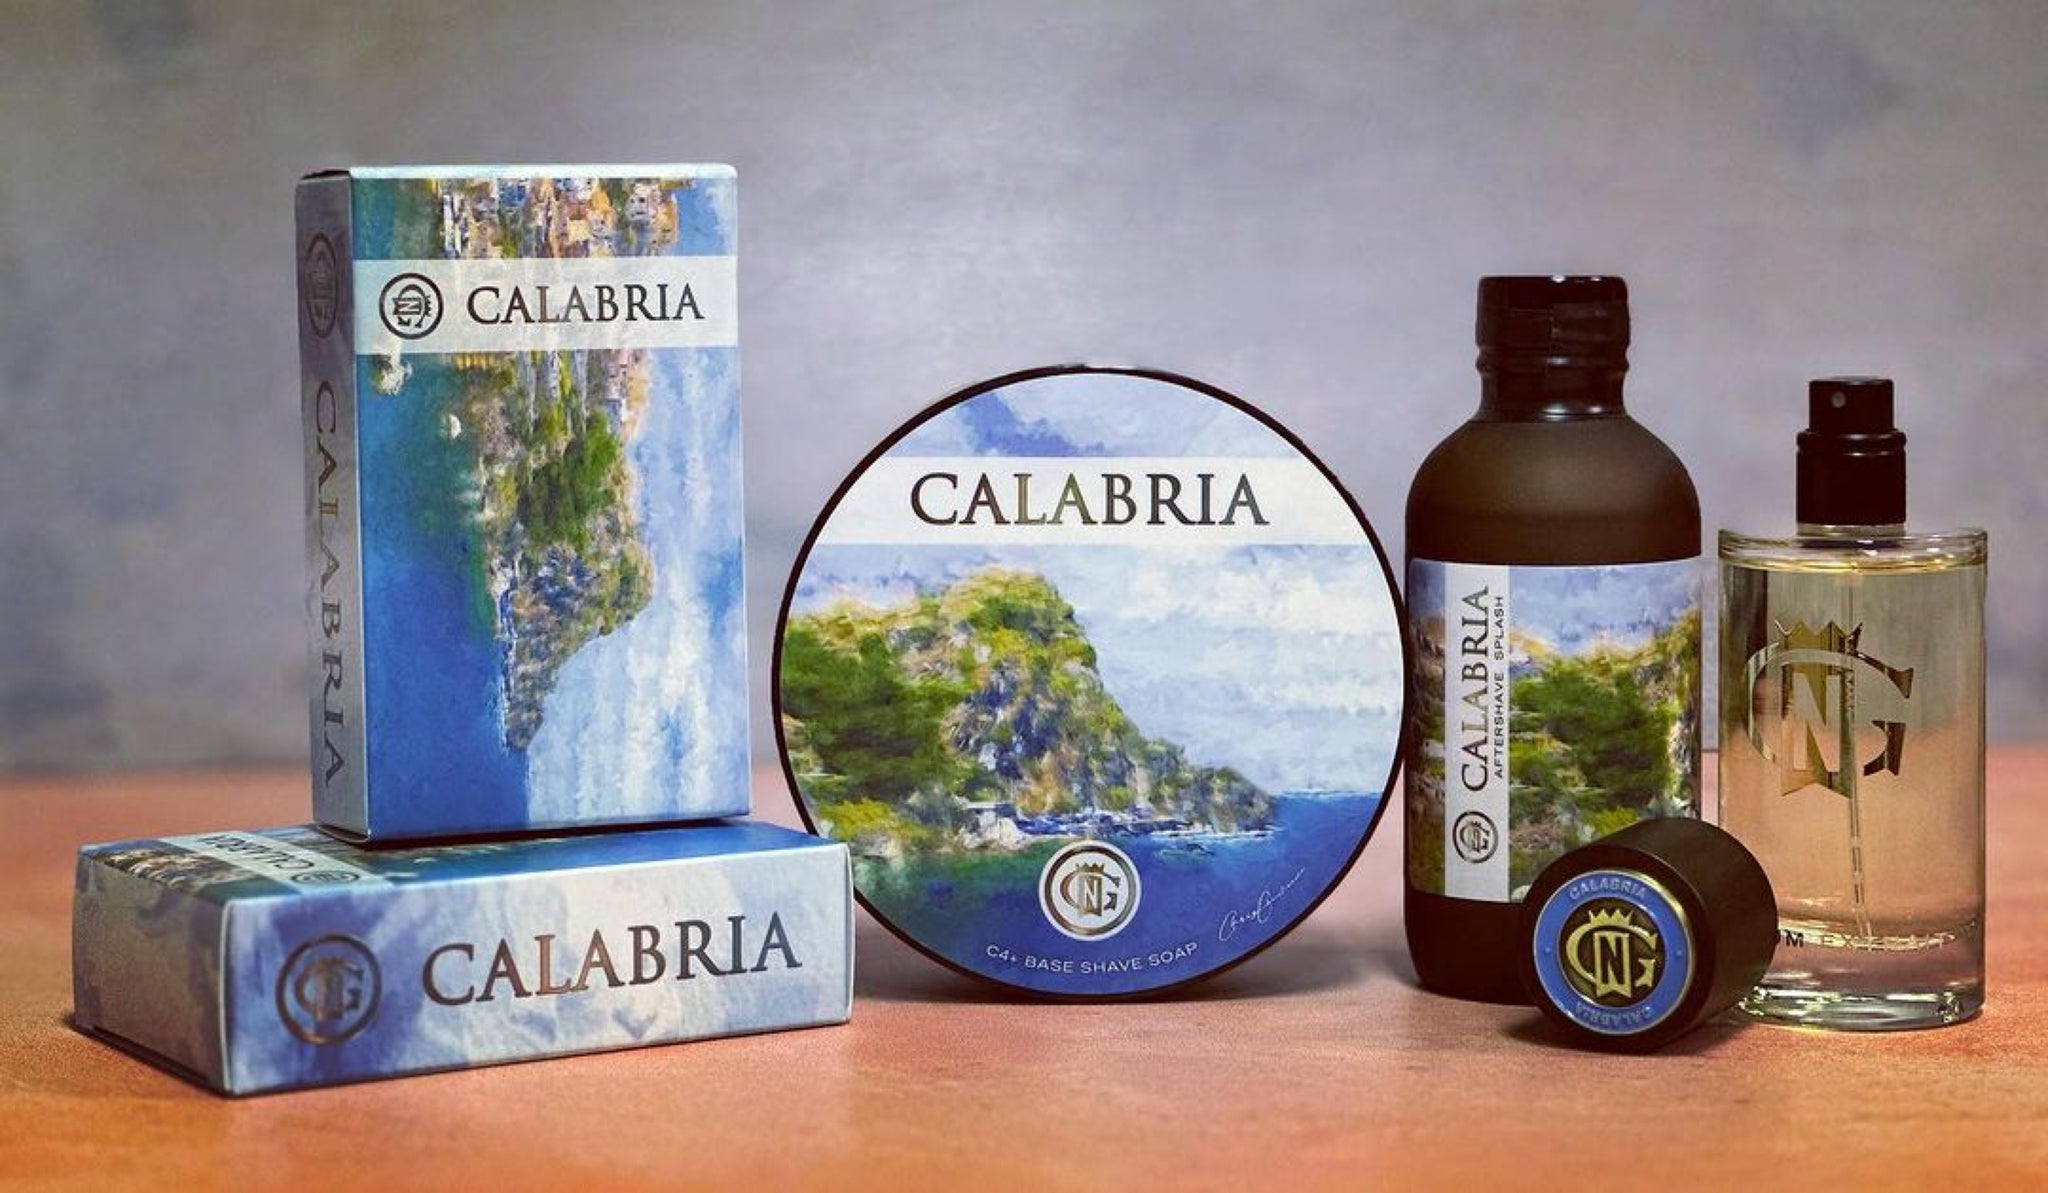 Calabria Parfum & Shave Gift Set (Trotter “Seaglass” #25  T1 Knot)